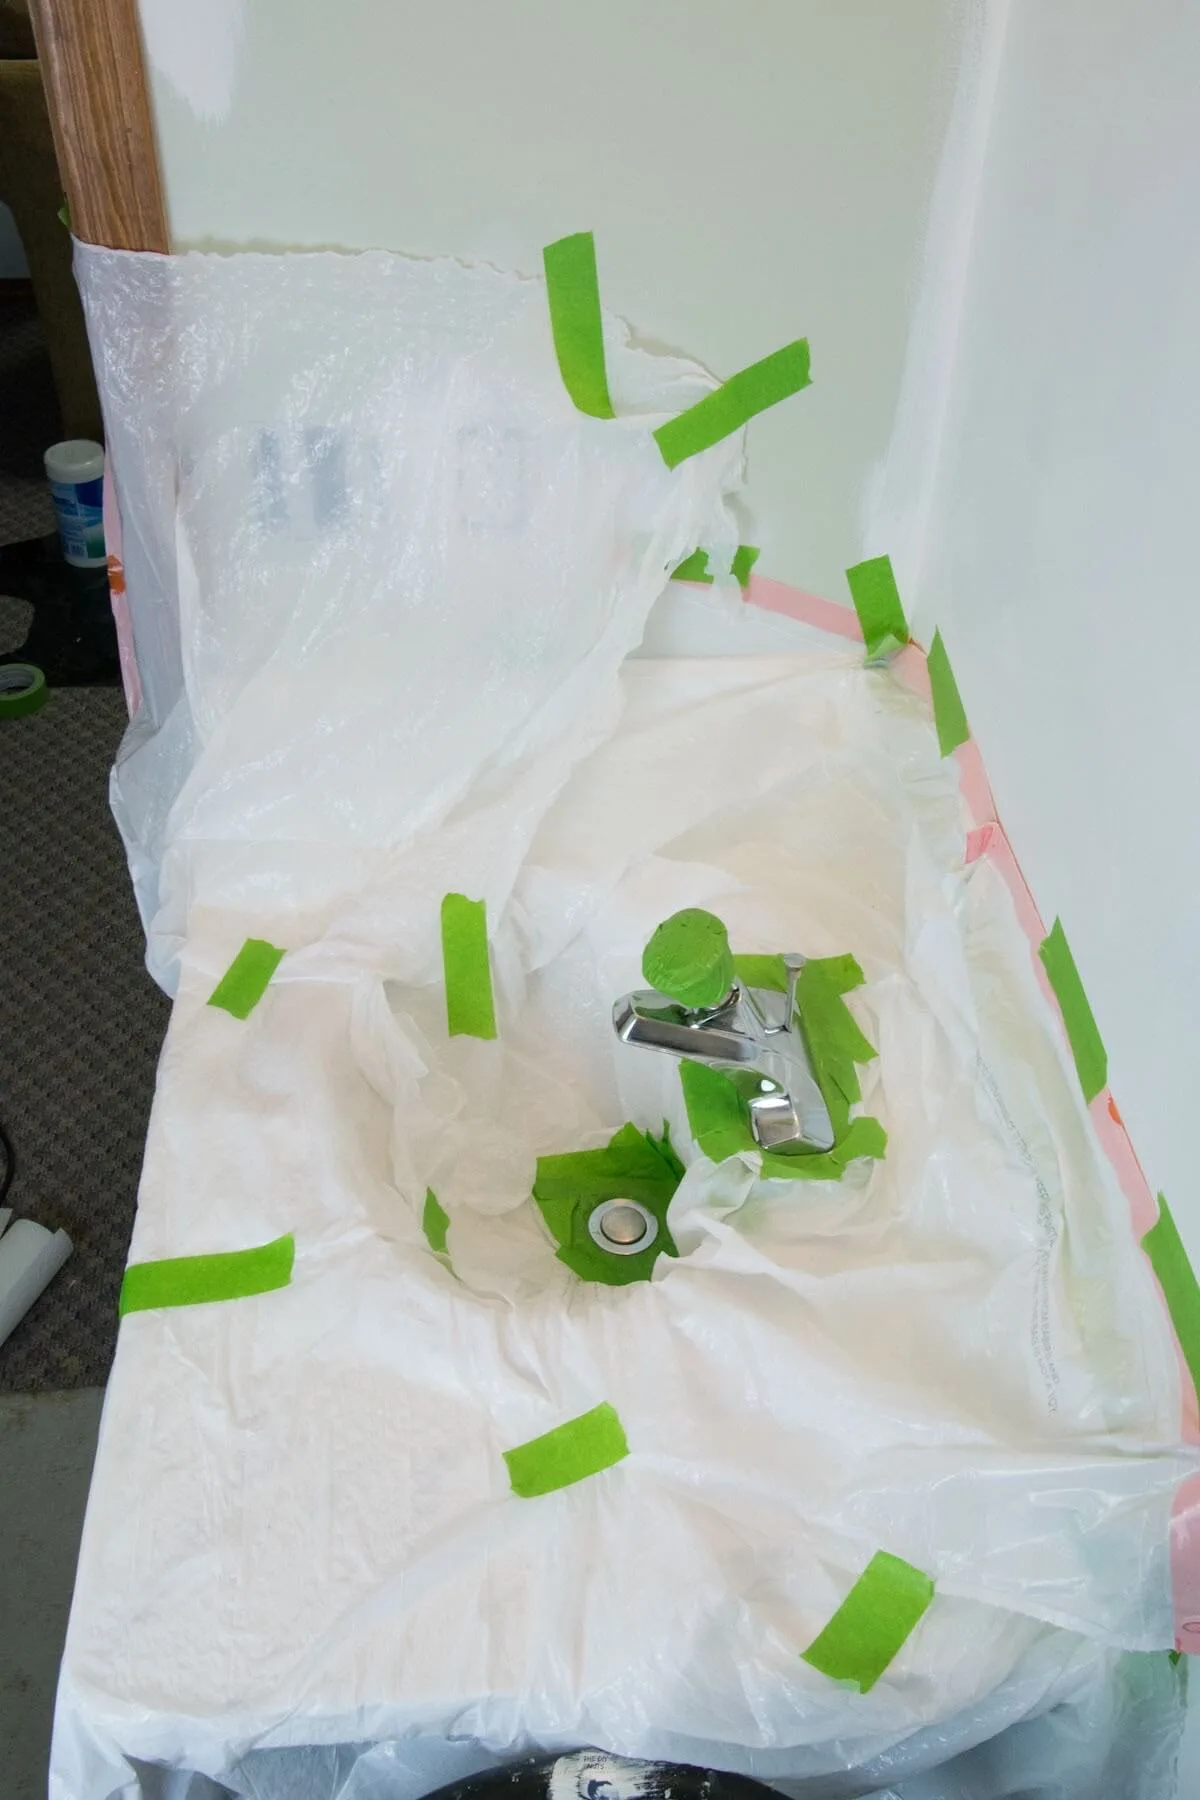 sink with plastic bags and green tape around it.